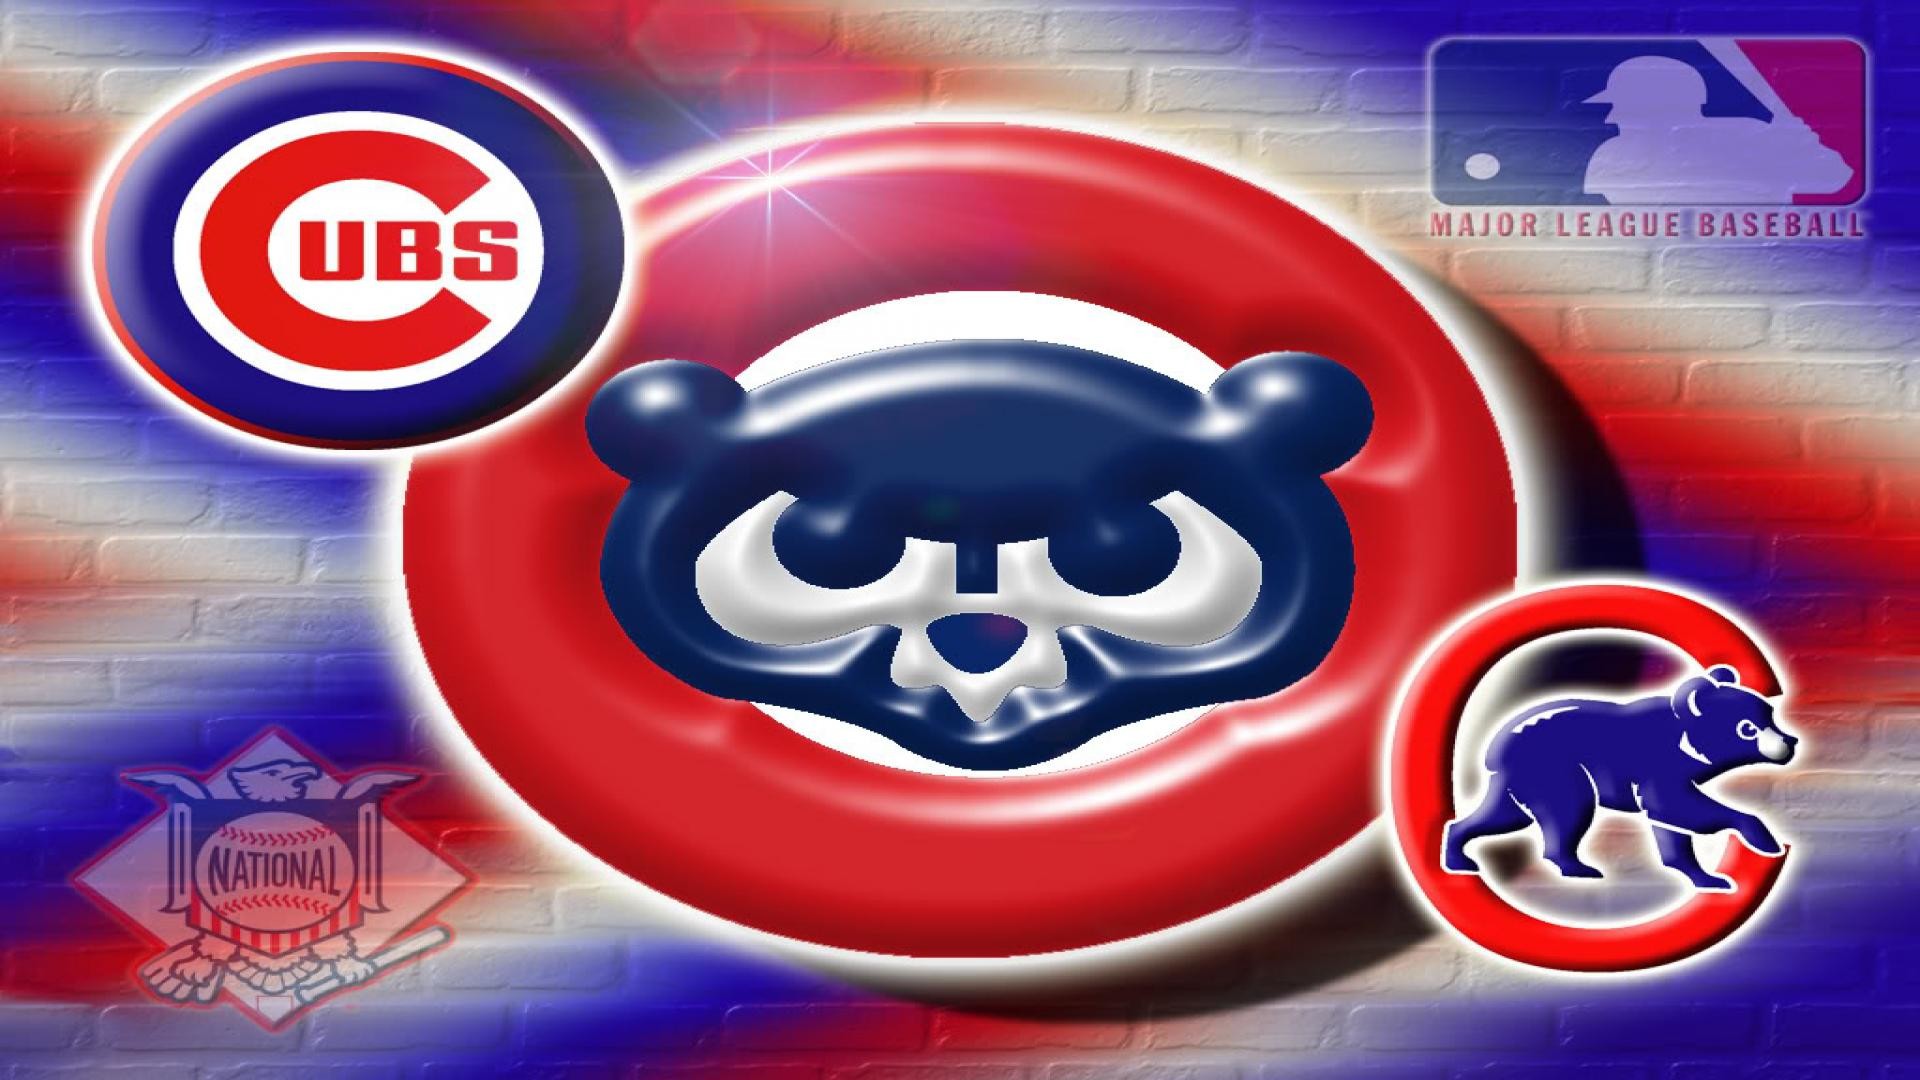 Chicago Cubs Chicago Cubs Mlb Baseball Background Wallpaper Wpt8403084 1920x1080